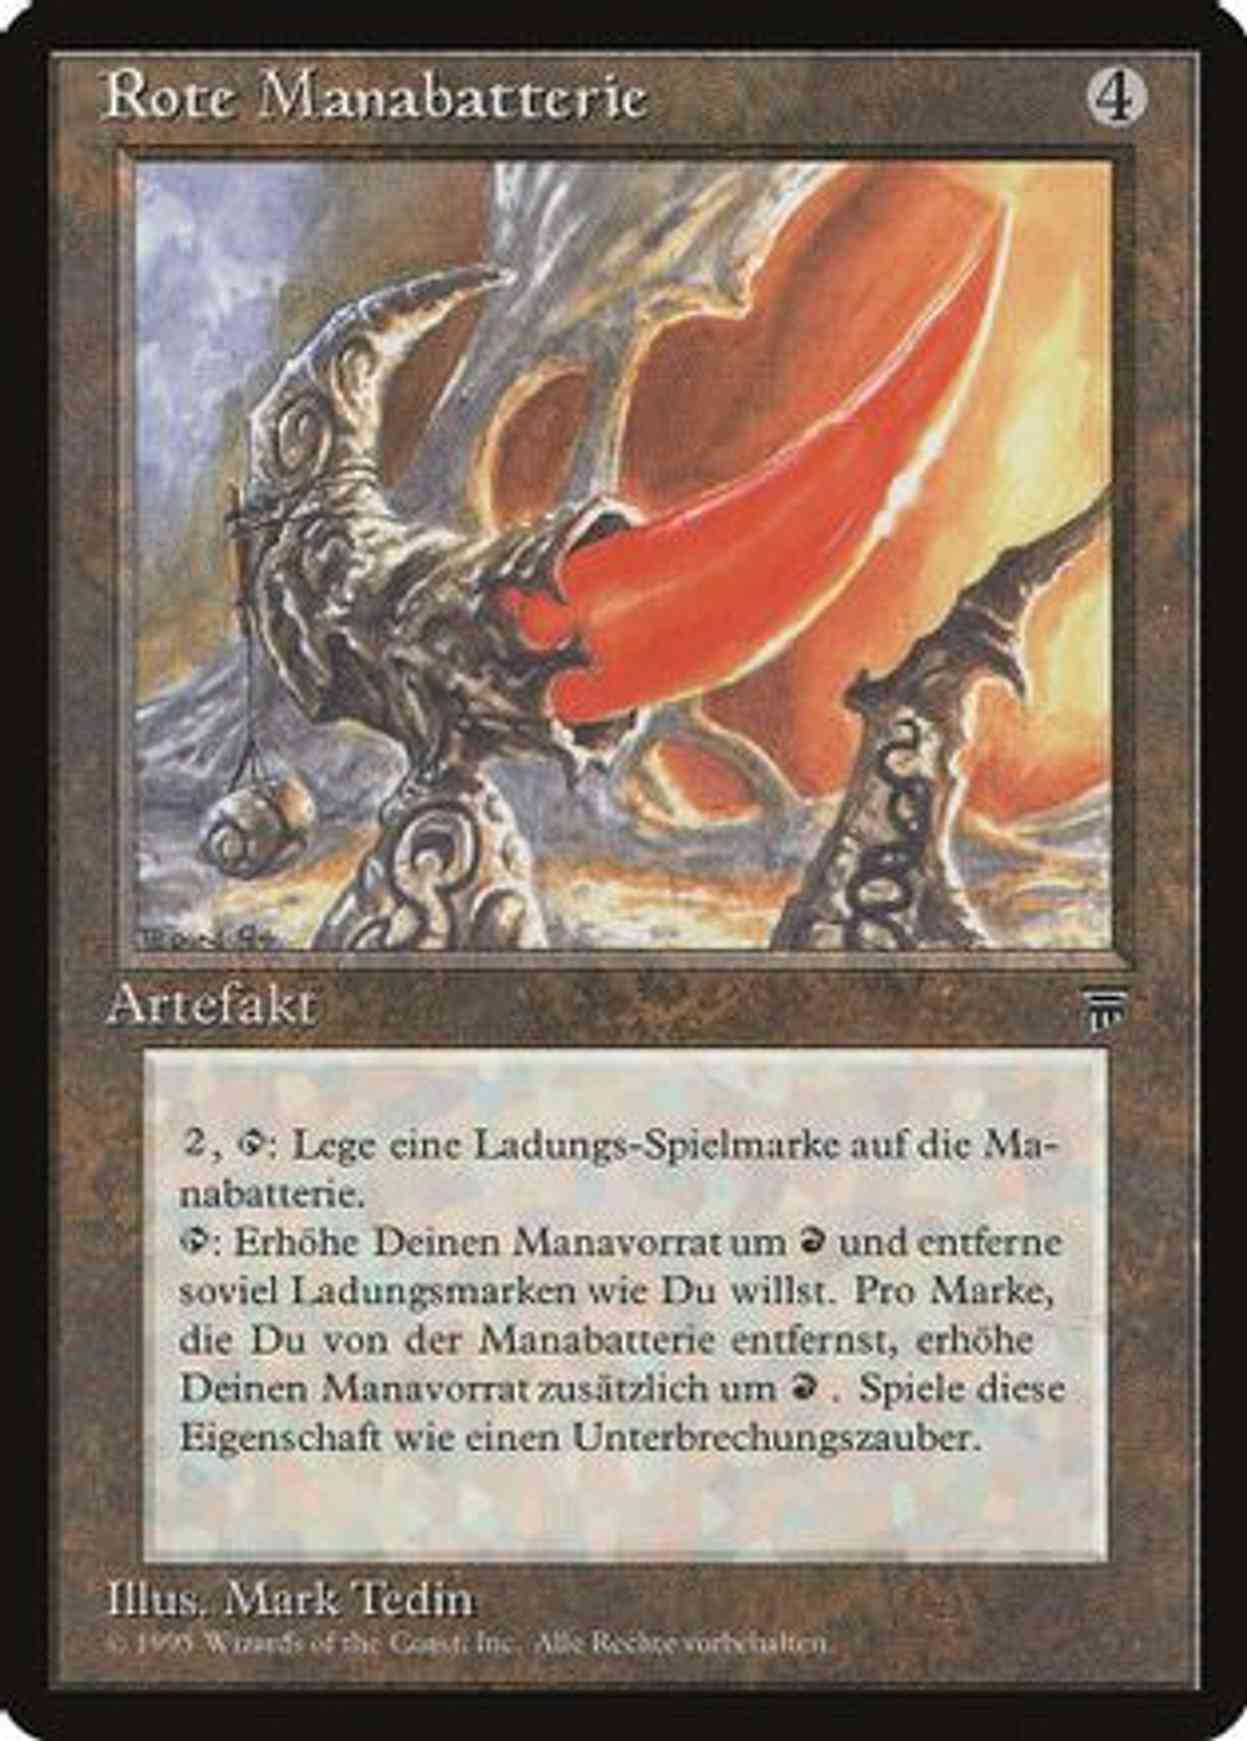 Red Mana Battery (German) - "Rote Manabatterie" magic card front